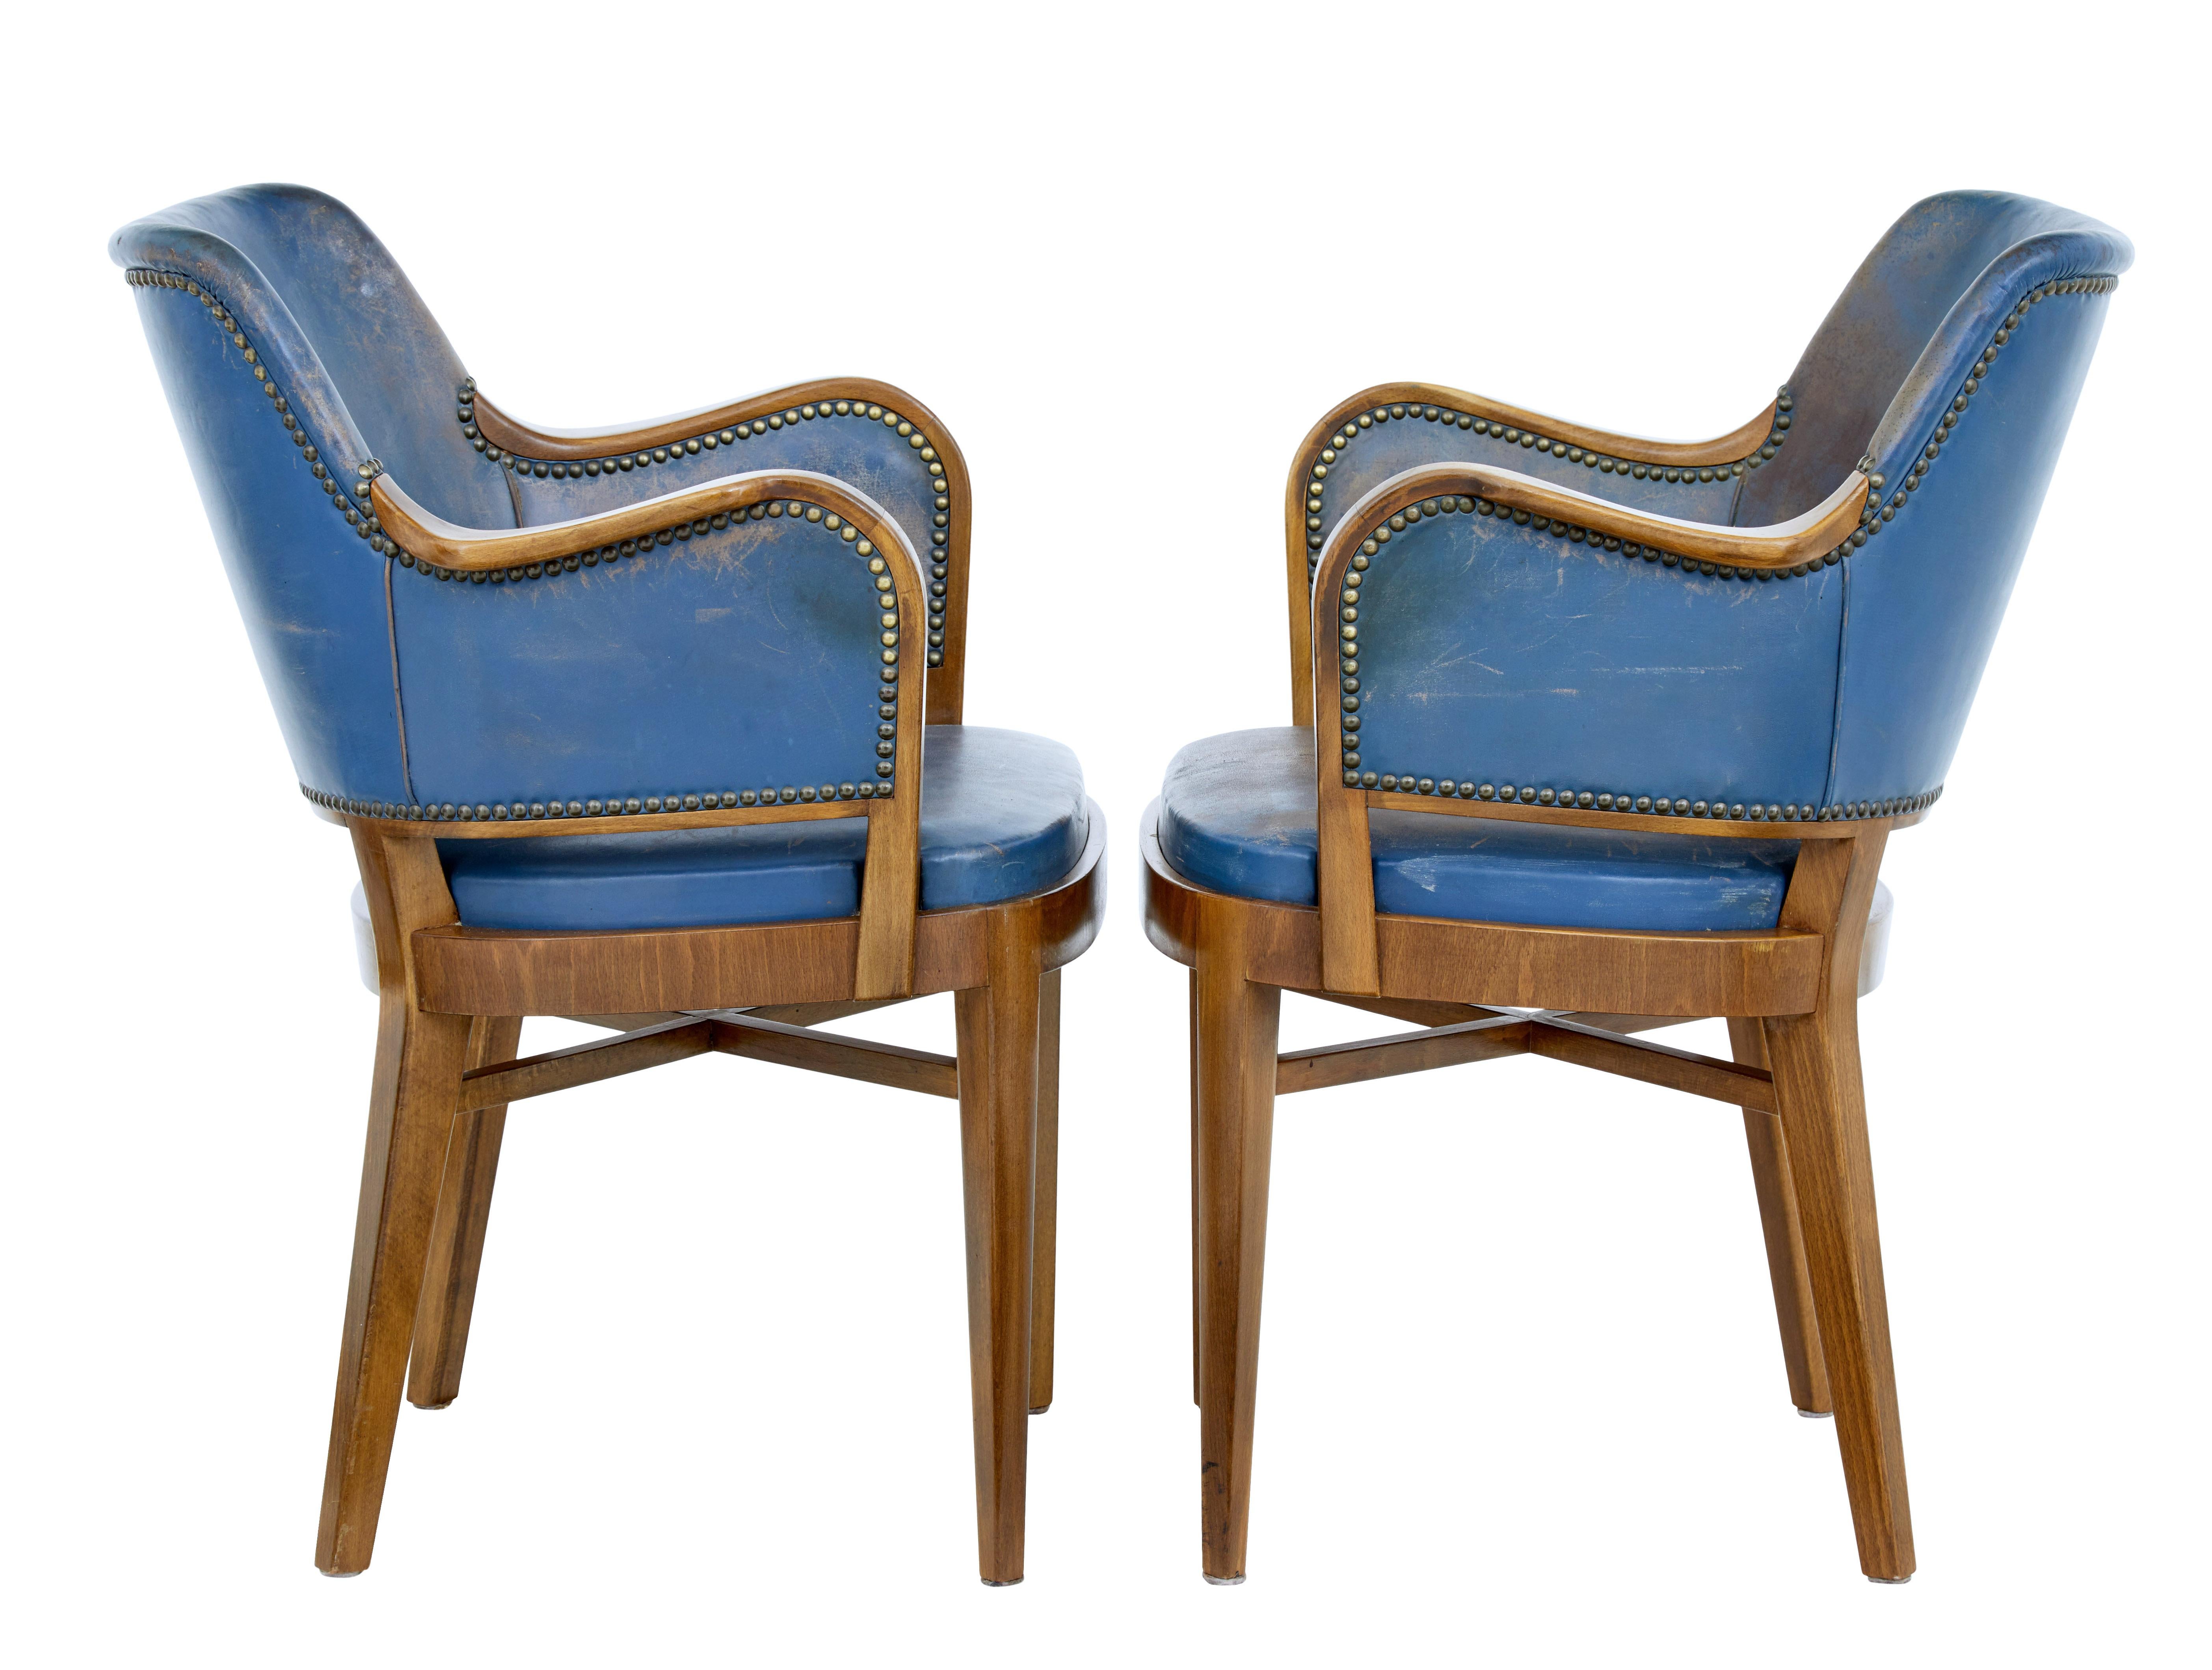 Swedish Pair of Mid-20th Century Teak and Leather Armchairs